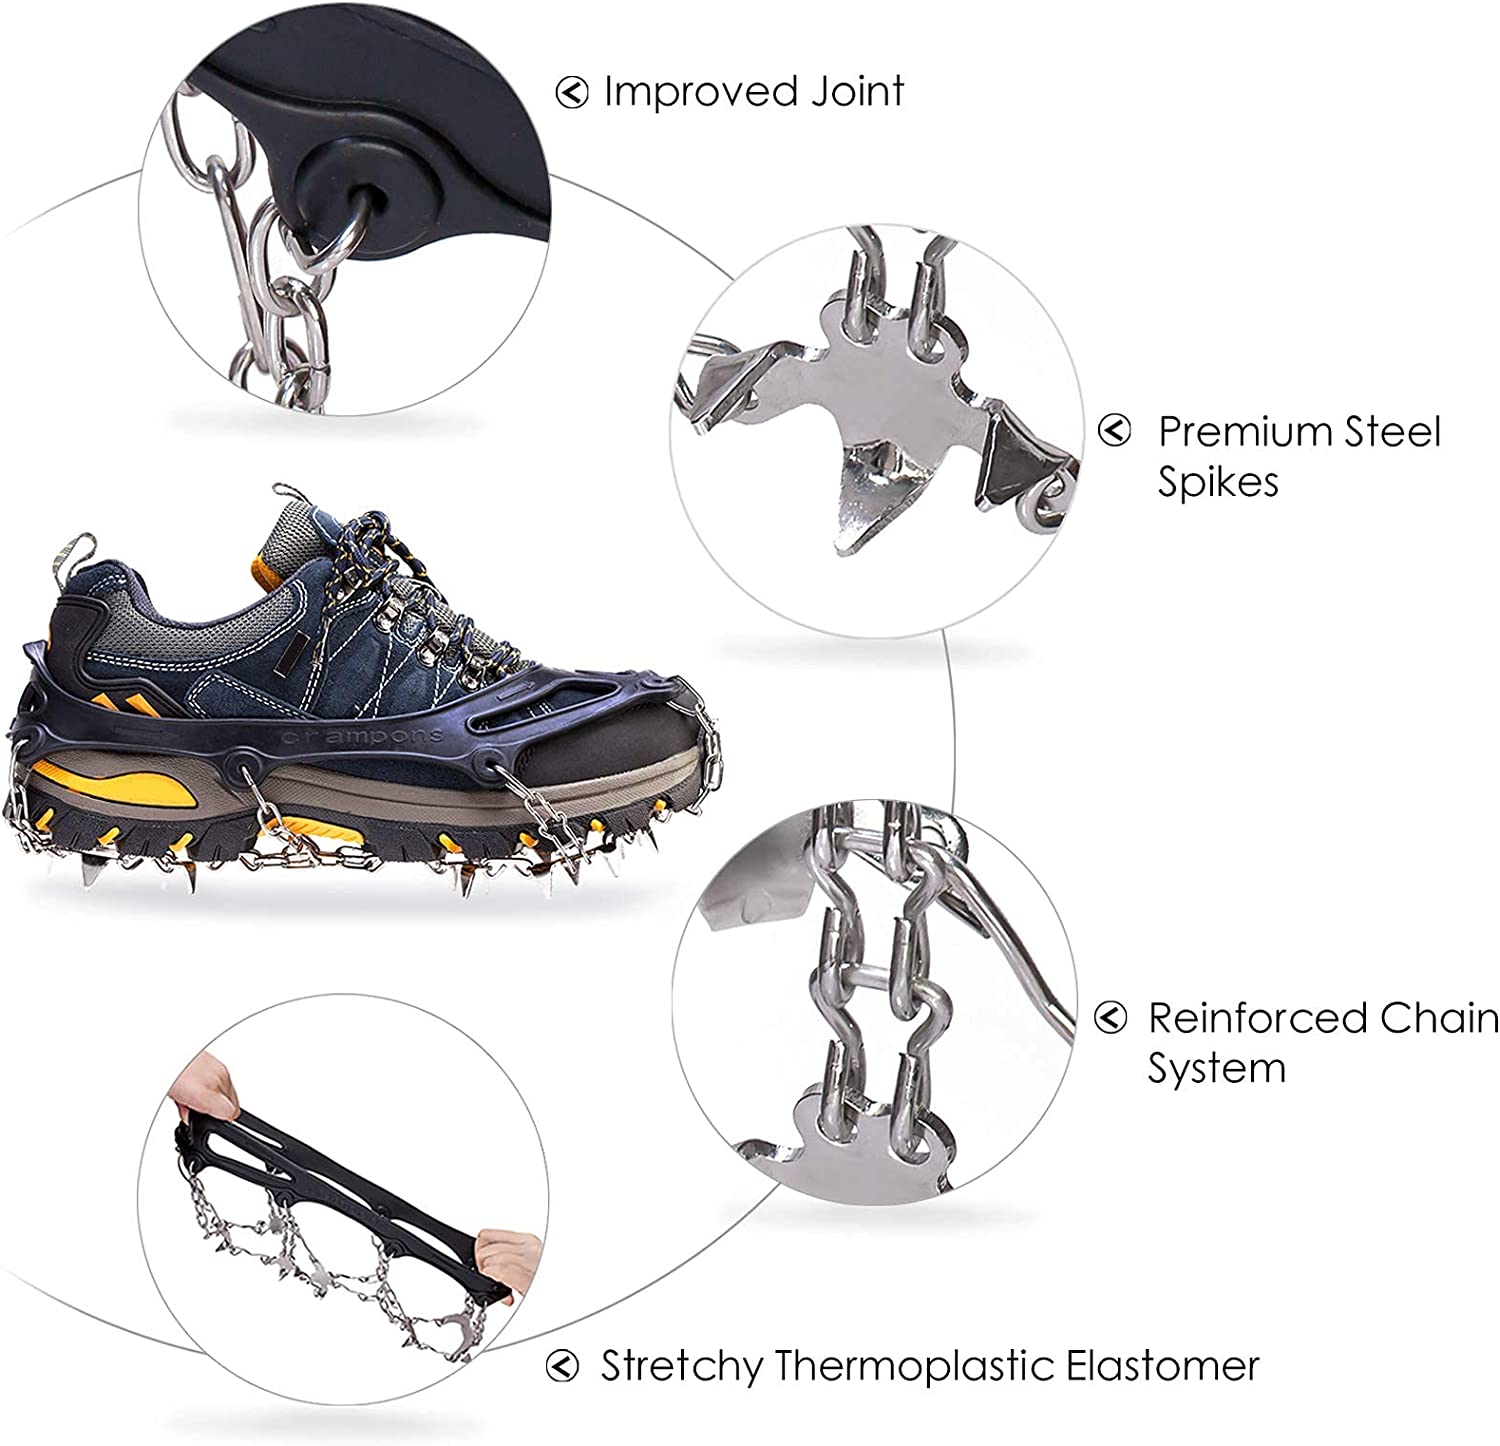 Detailed product features for crampons. The text reads, 'Improved joint, premium steel spikes, reinforced chain system, stretchy thermoplastic elastomer.'